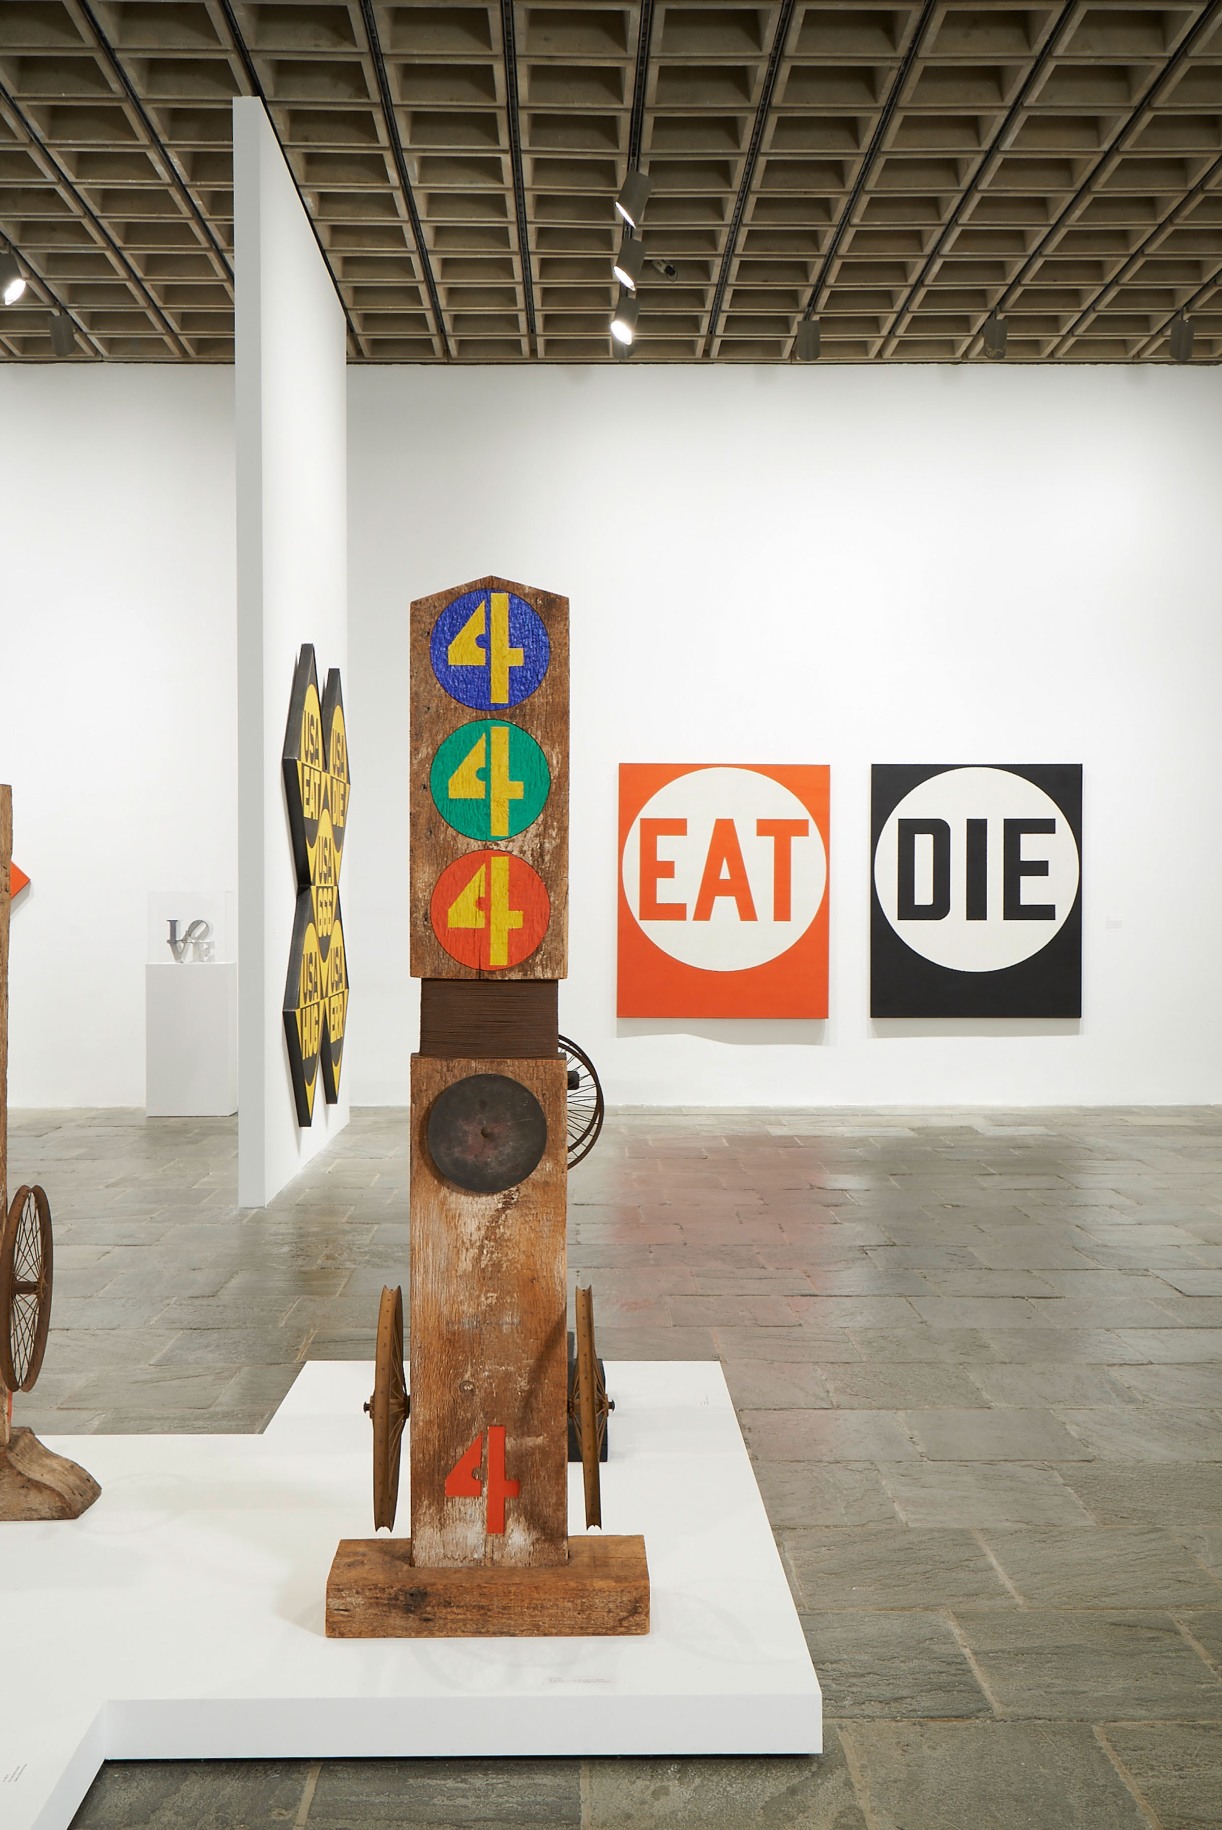 Installation view of&nbsp;Robert Indiana: Beyond LOVE, Whitney Museum of American Art, New York, September 26, 2013&ndash;January 5, 2014. Left to right, LOVE (1966&ndash;1968), USA 666 (The Sixth American Dream) (1964&ndash;66), Four (1959&ndash;62/1972), and Eat/Die (1962), &nbsp;